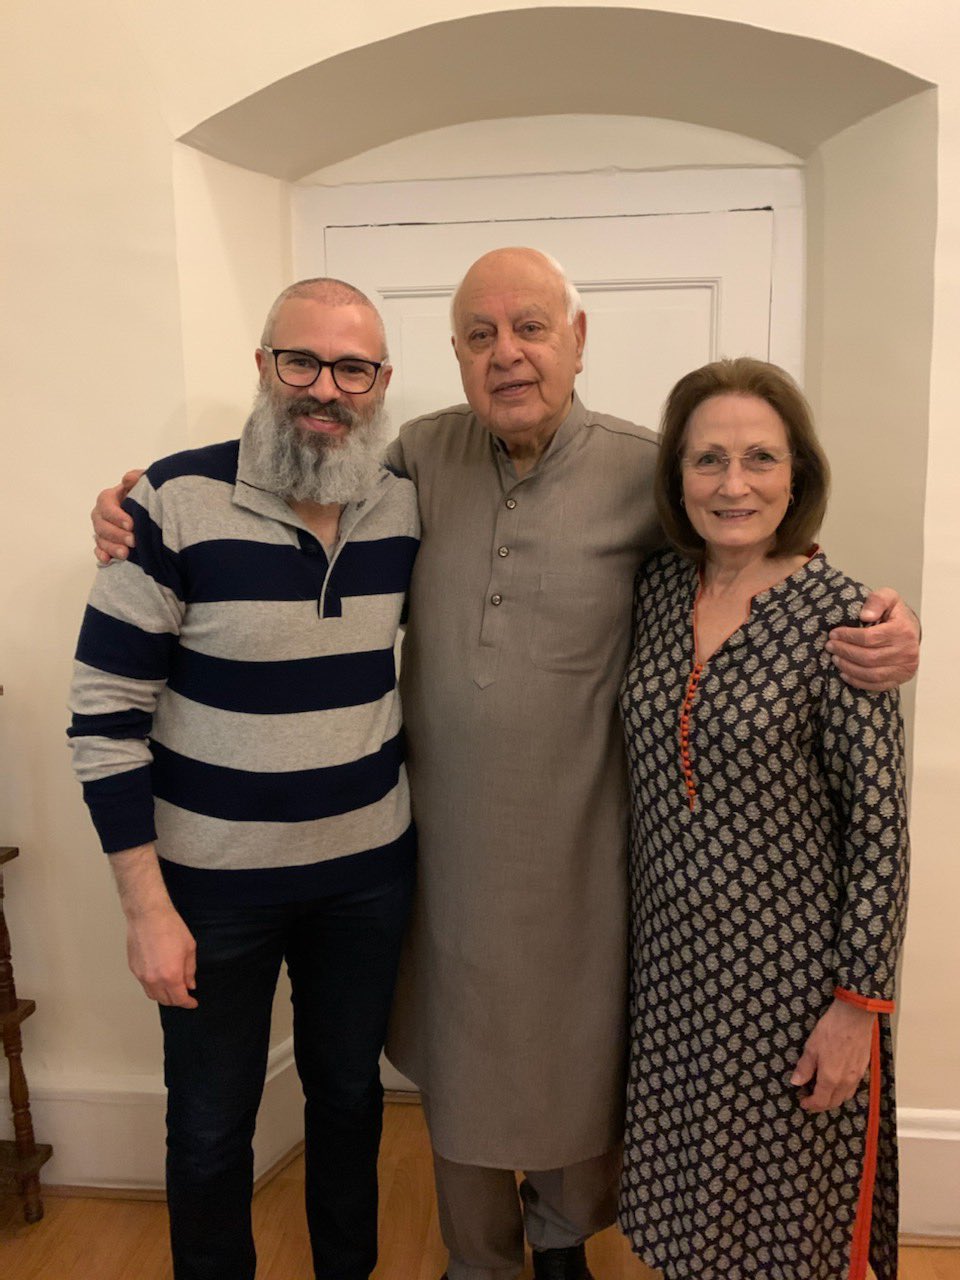 NC president Farooq Abdullah, centre, expressed happiness over the revocation of PSA detention of Omar, left, but said that total redemption of the situation was not possible until all political detainees were not released.

